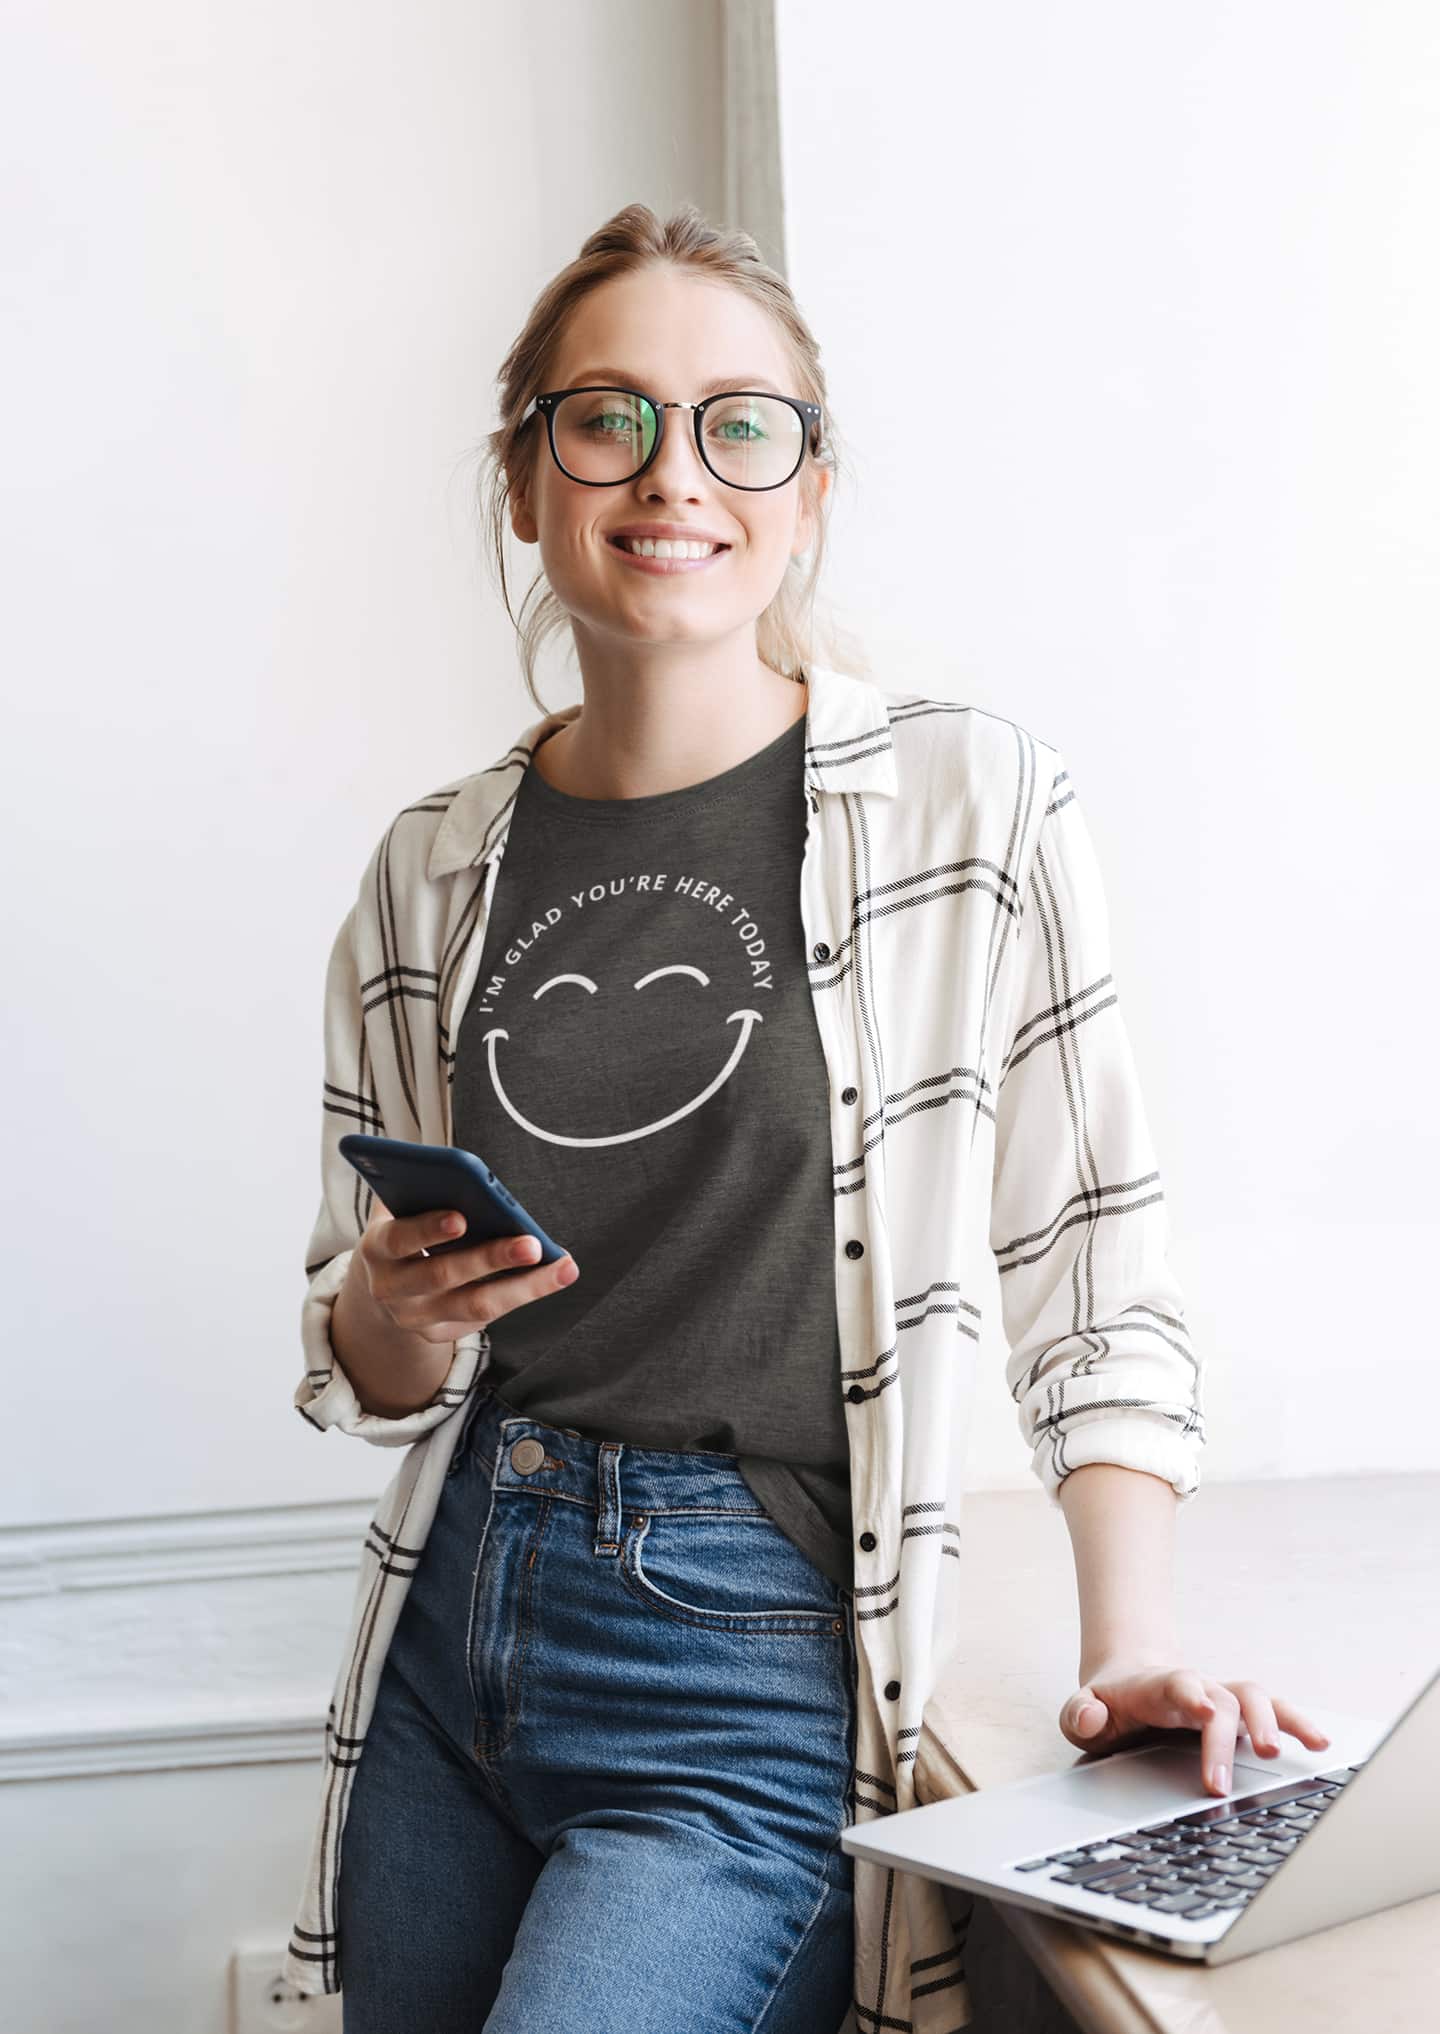 "I'm Glad You're Here Today" Smiley Tee for Teachers